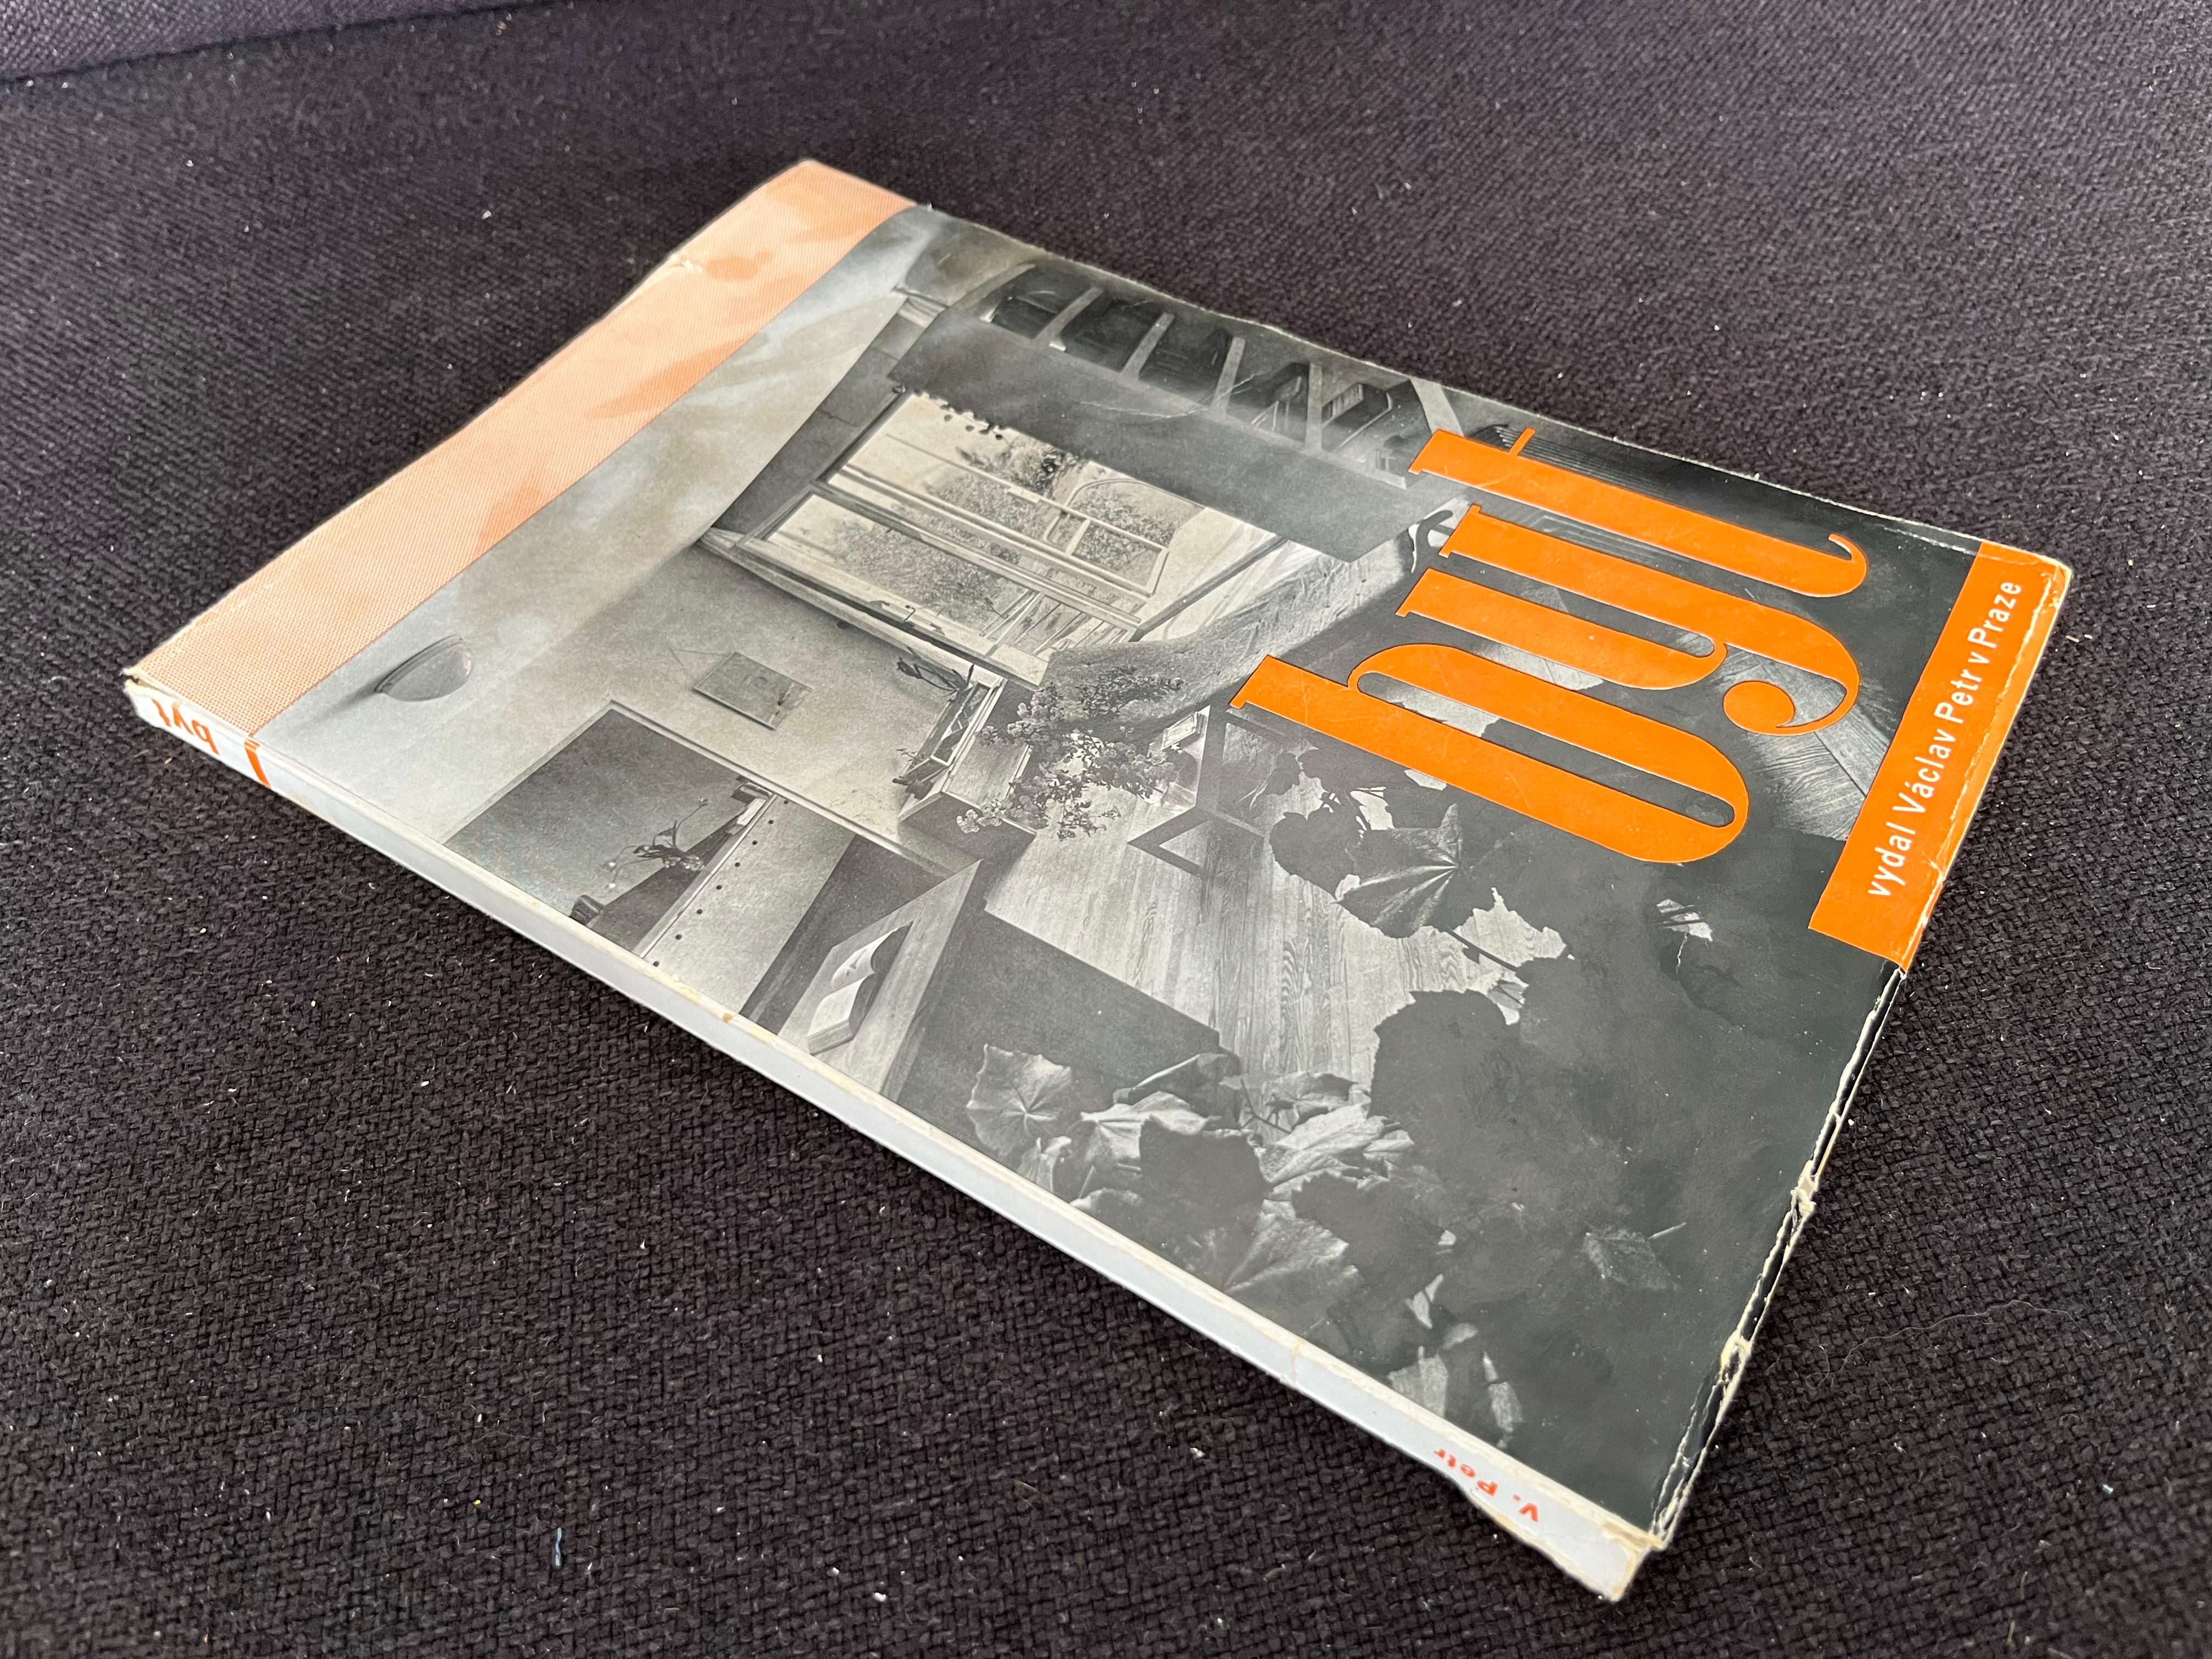 Extremely Rare Bauhaus Book BYT by Václav Petr, Ladislav Sutnar, 1934 In Fair Condition For Sale In Praha, CZ